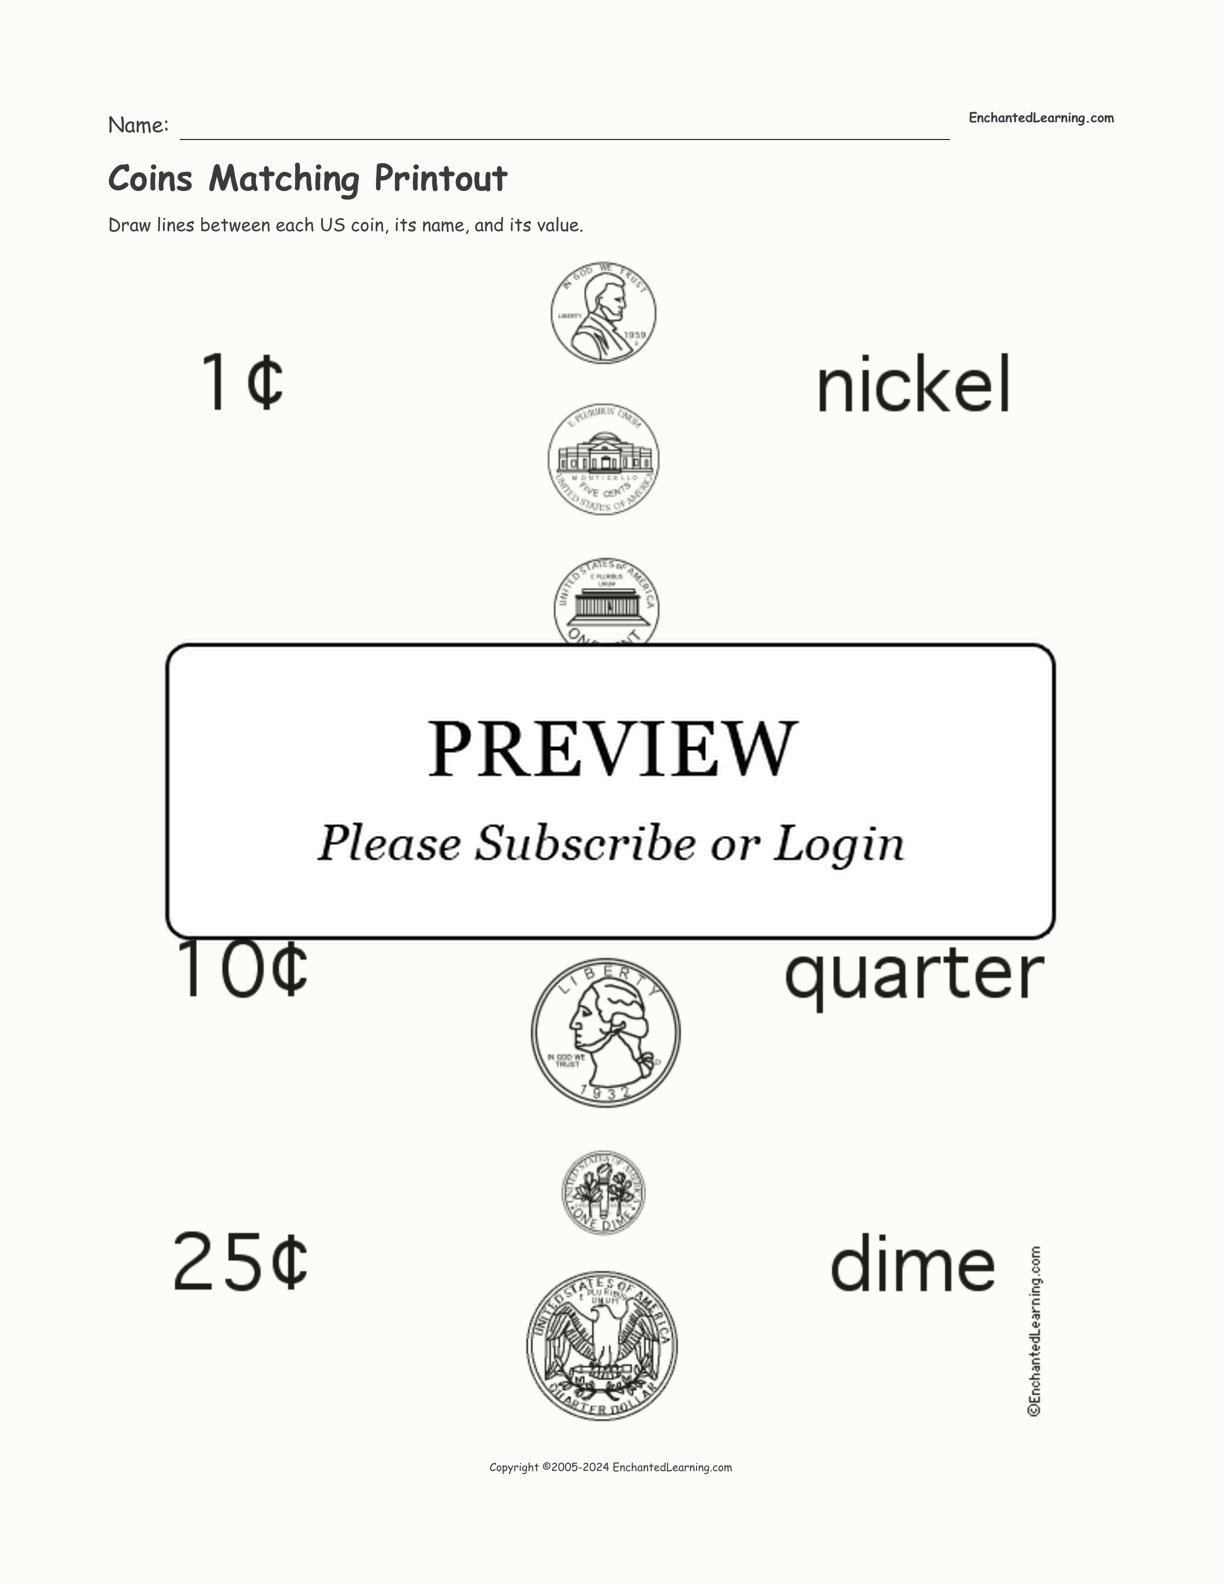 Coins Matching Printout interactive worksheet page 1